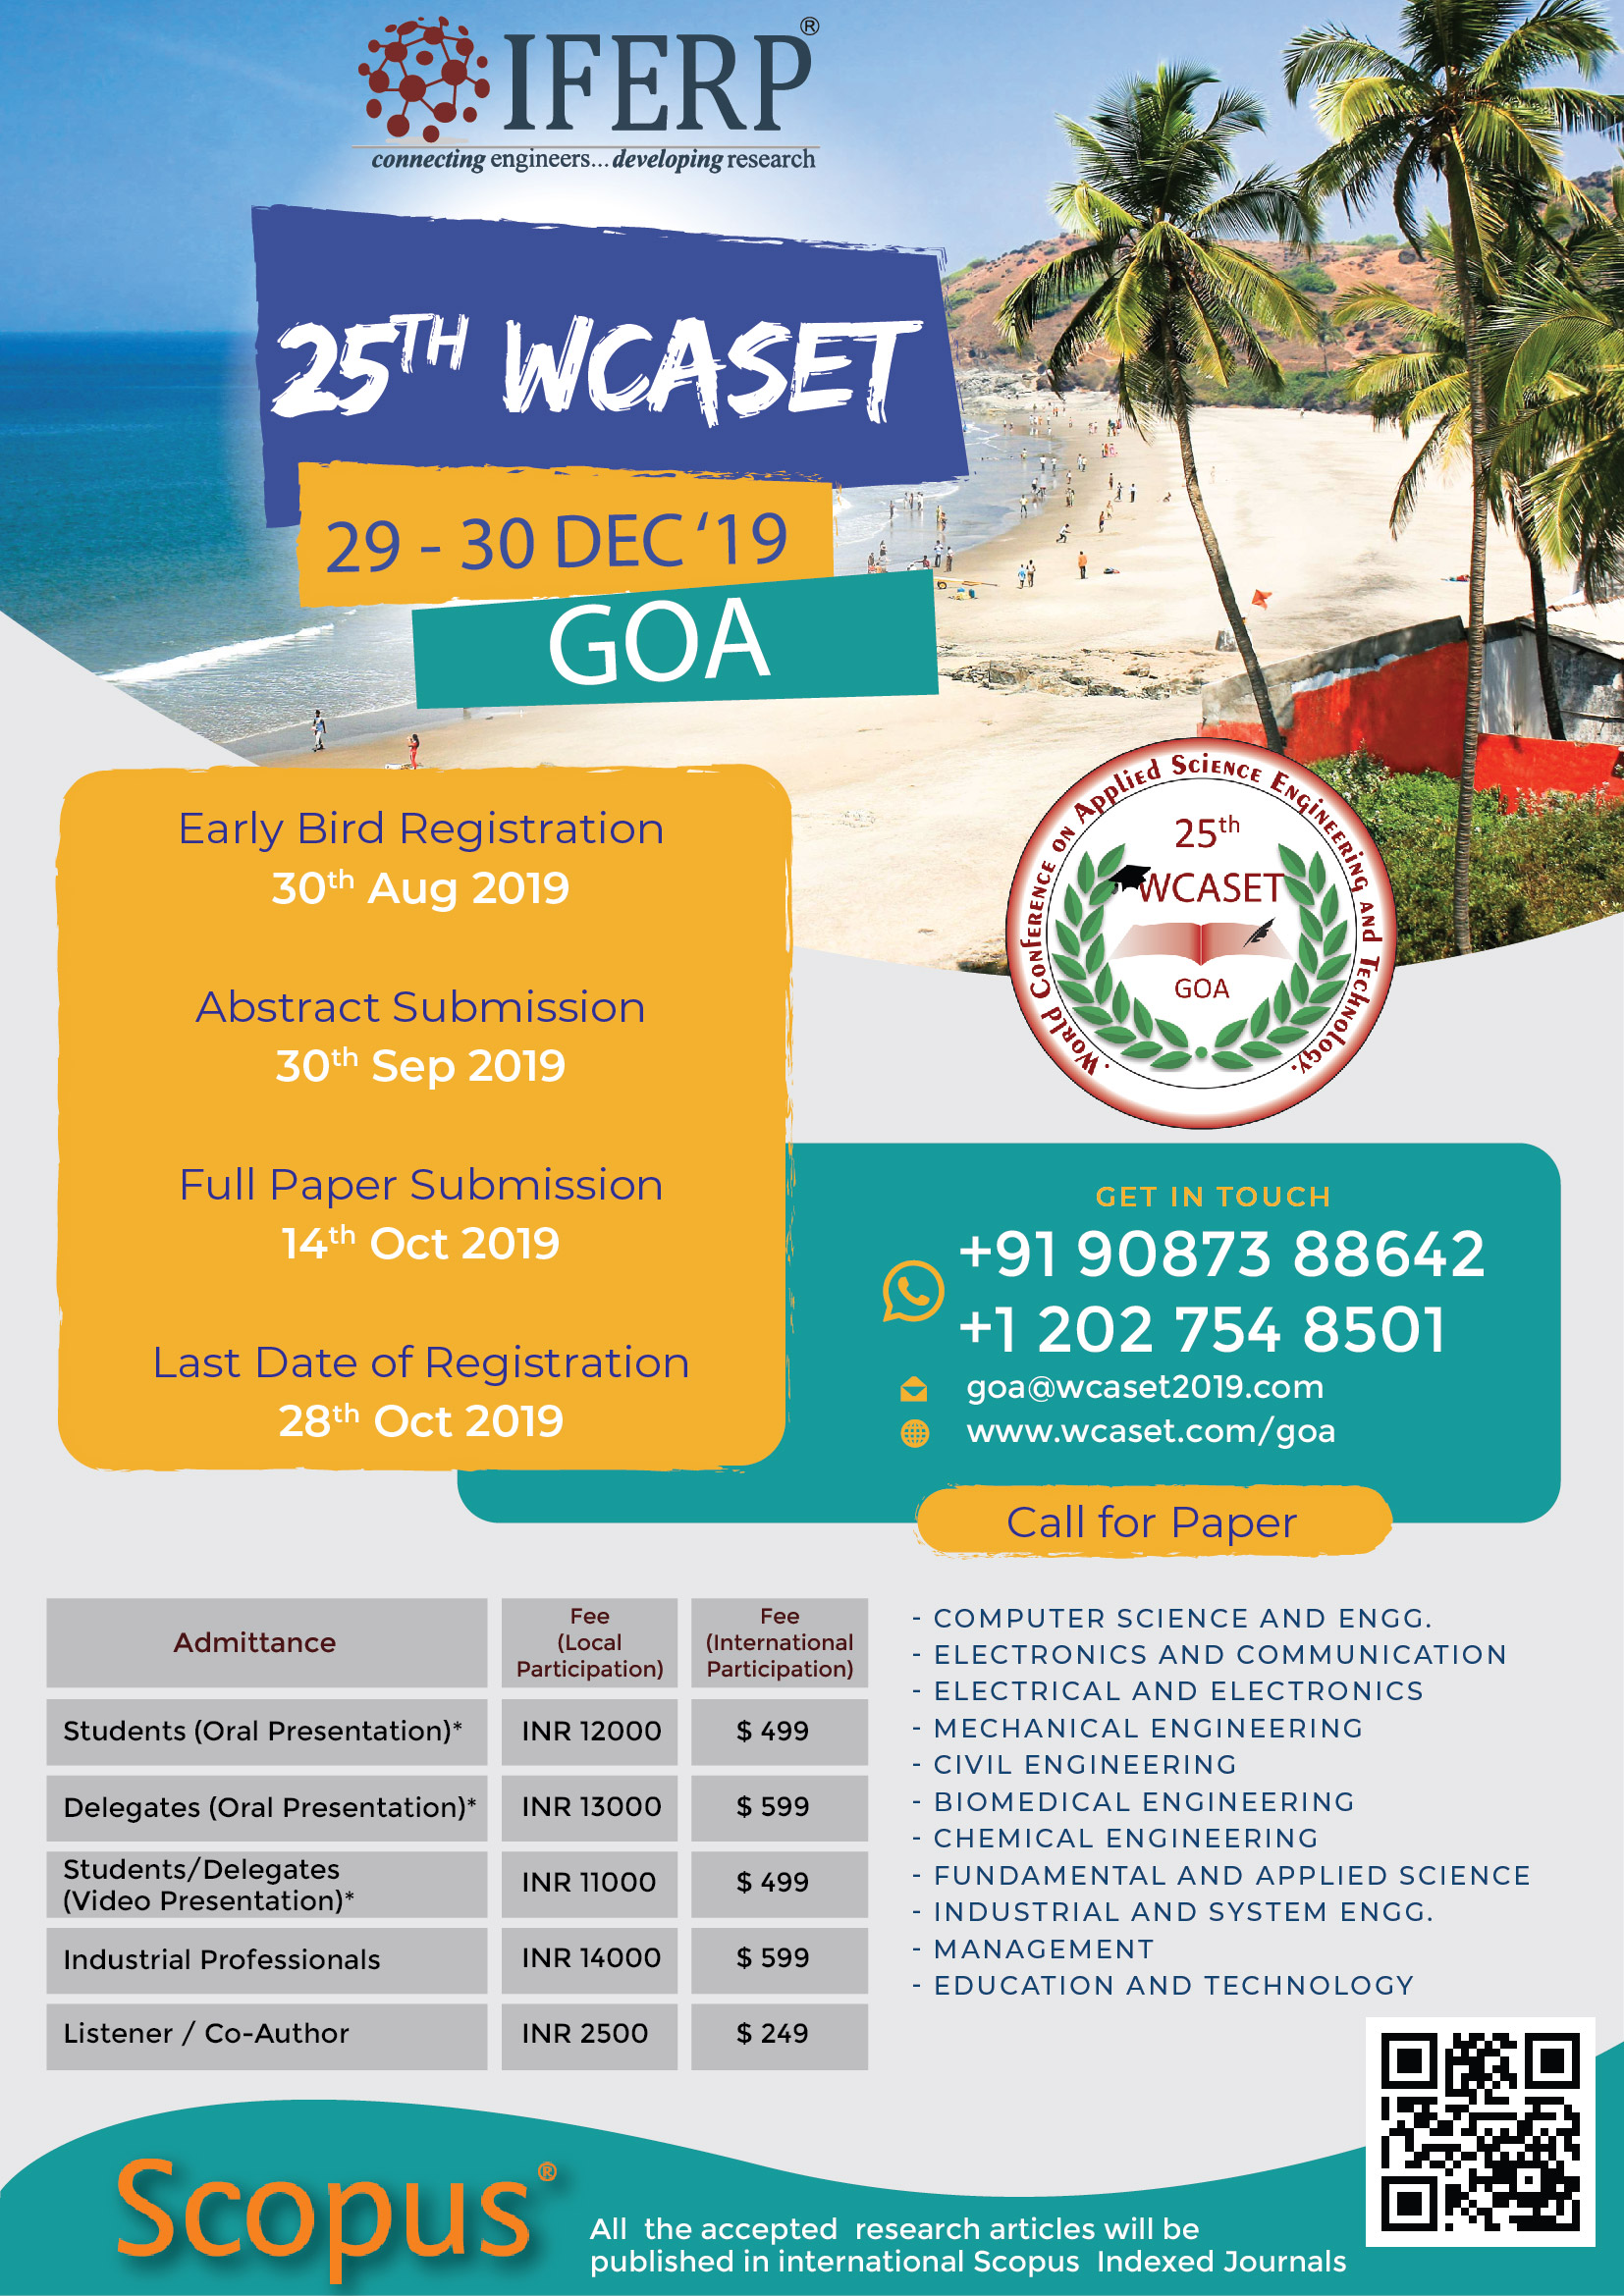 25th World Conference on Applied Science Engineering and Technology (WCASET - 19), Margao, Goa, India